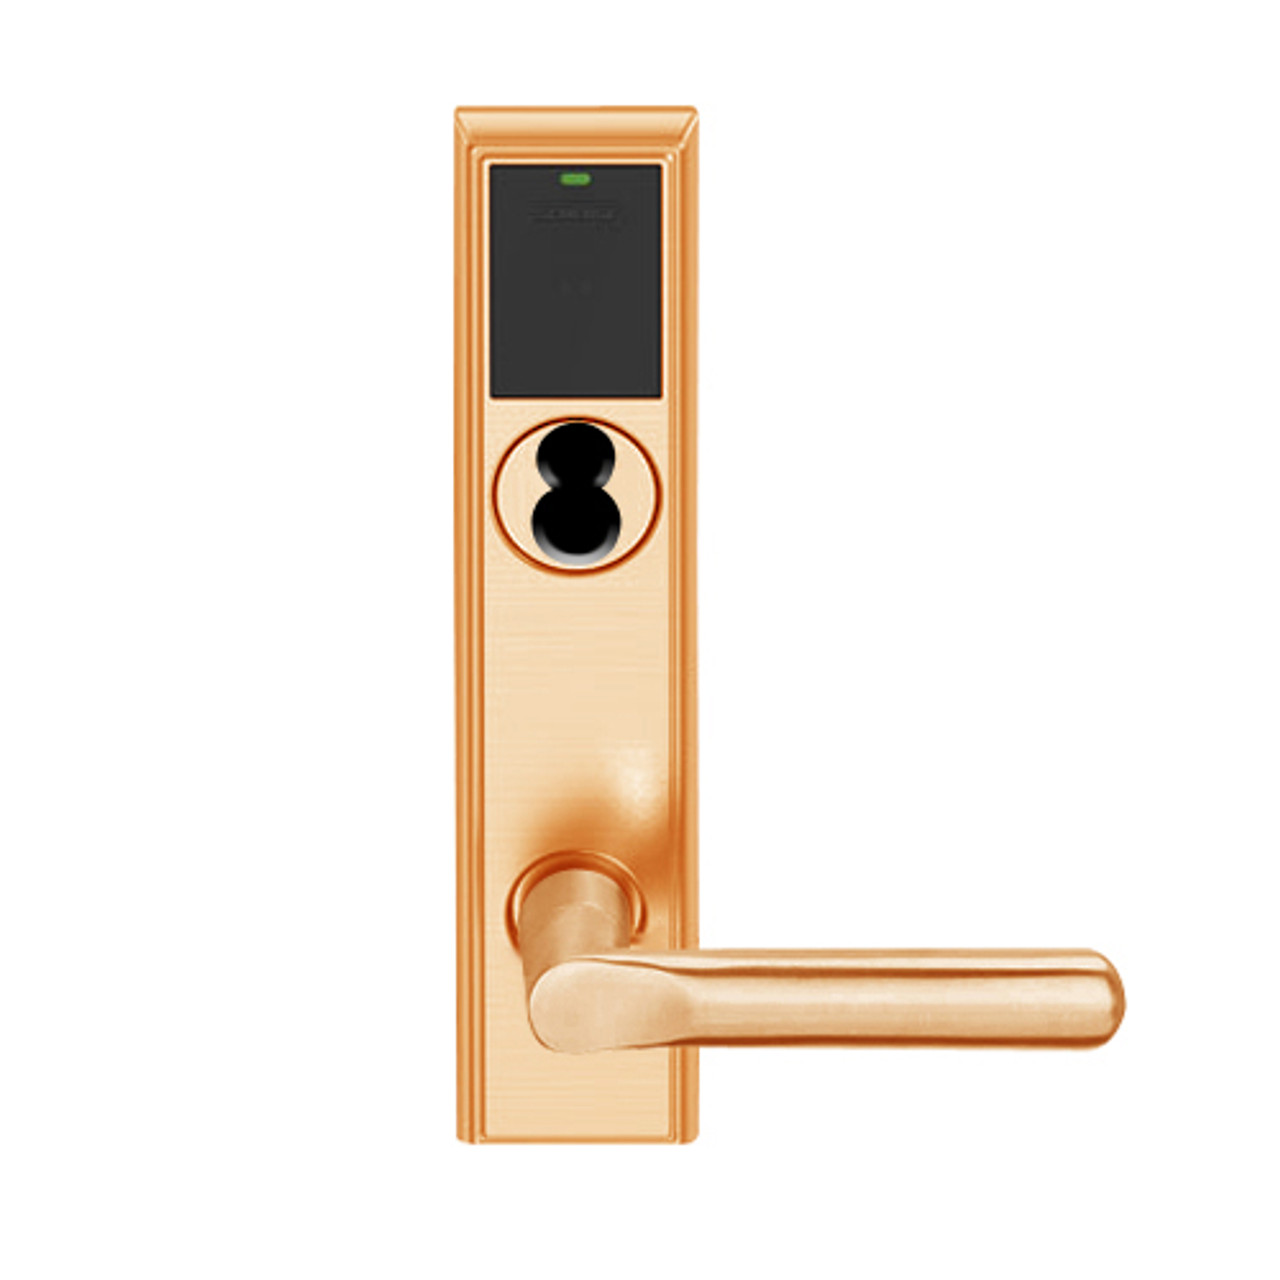 LEMD-ADD-J-18-612 Schlage Privacy/Apartment Wireless Addison Mortise Deadbolt Lock with LED and 18 Lever Prepped for FSIC in Satin Bronze